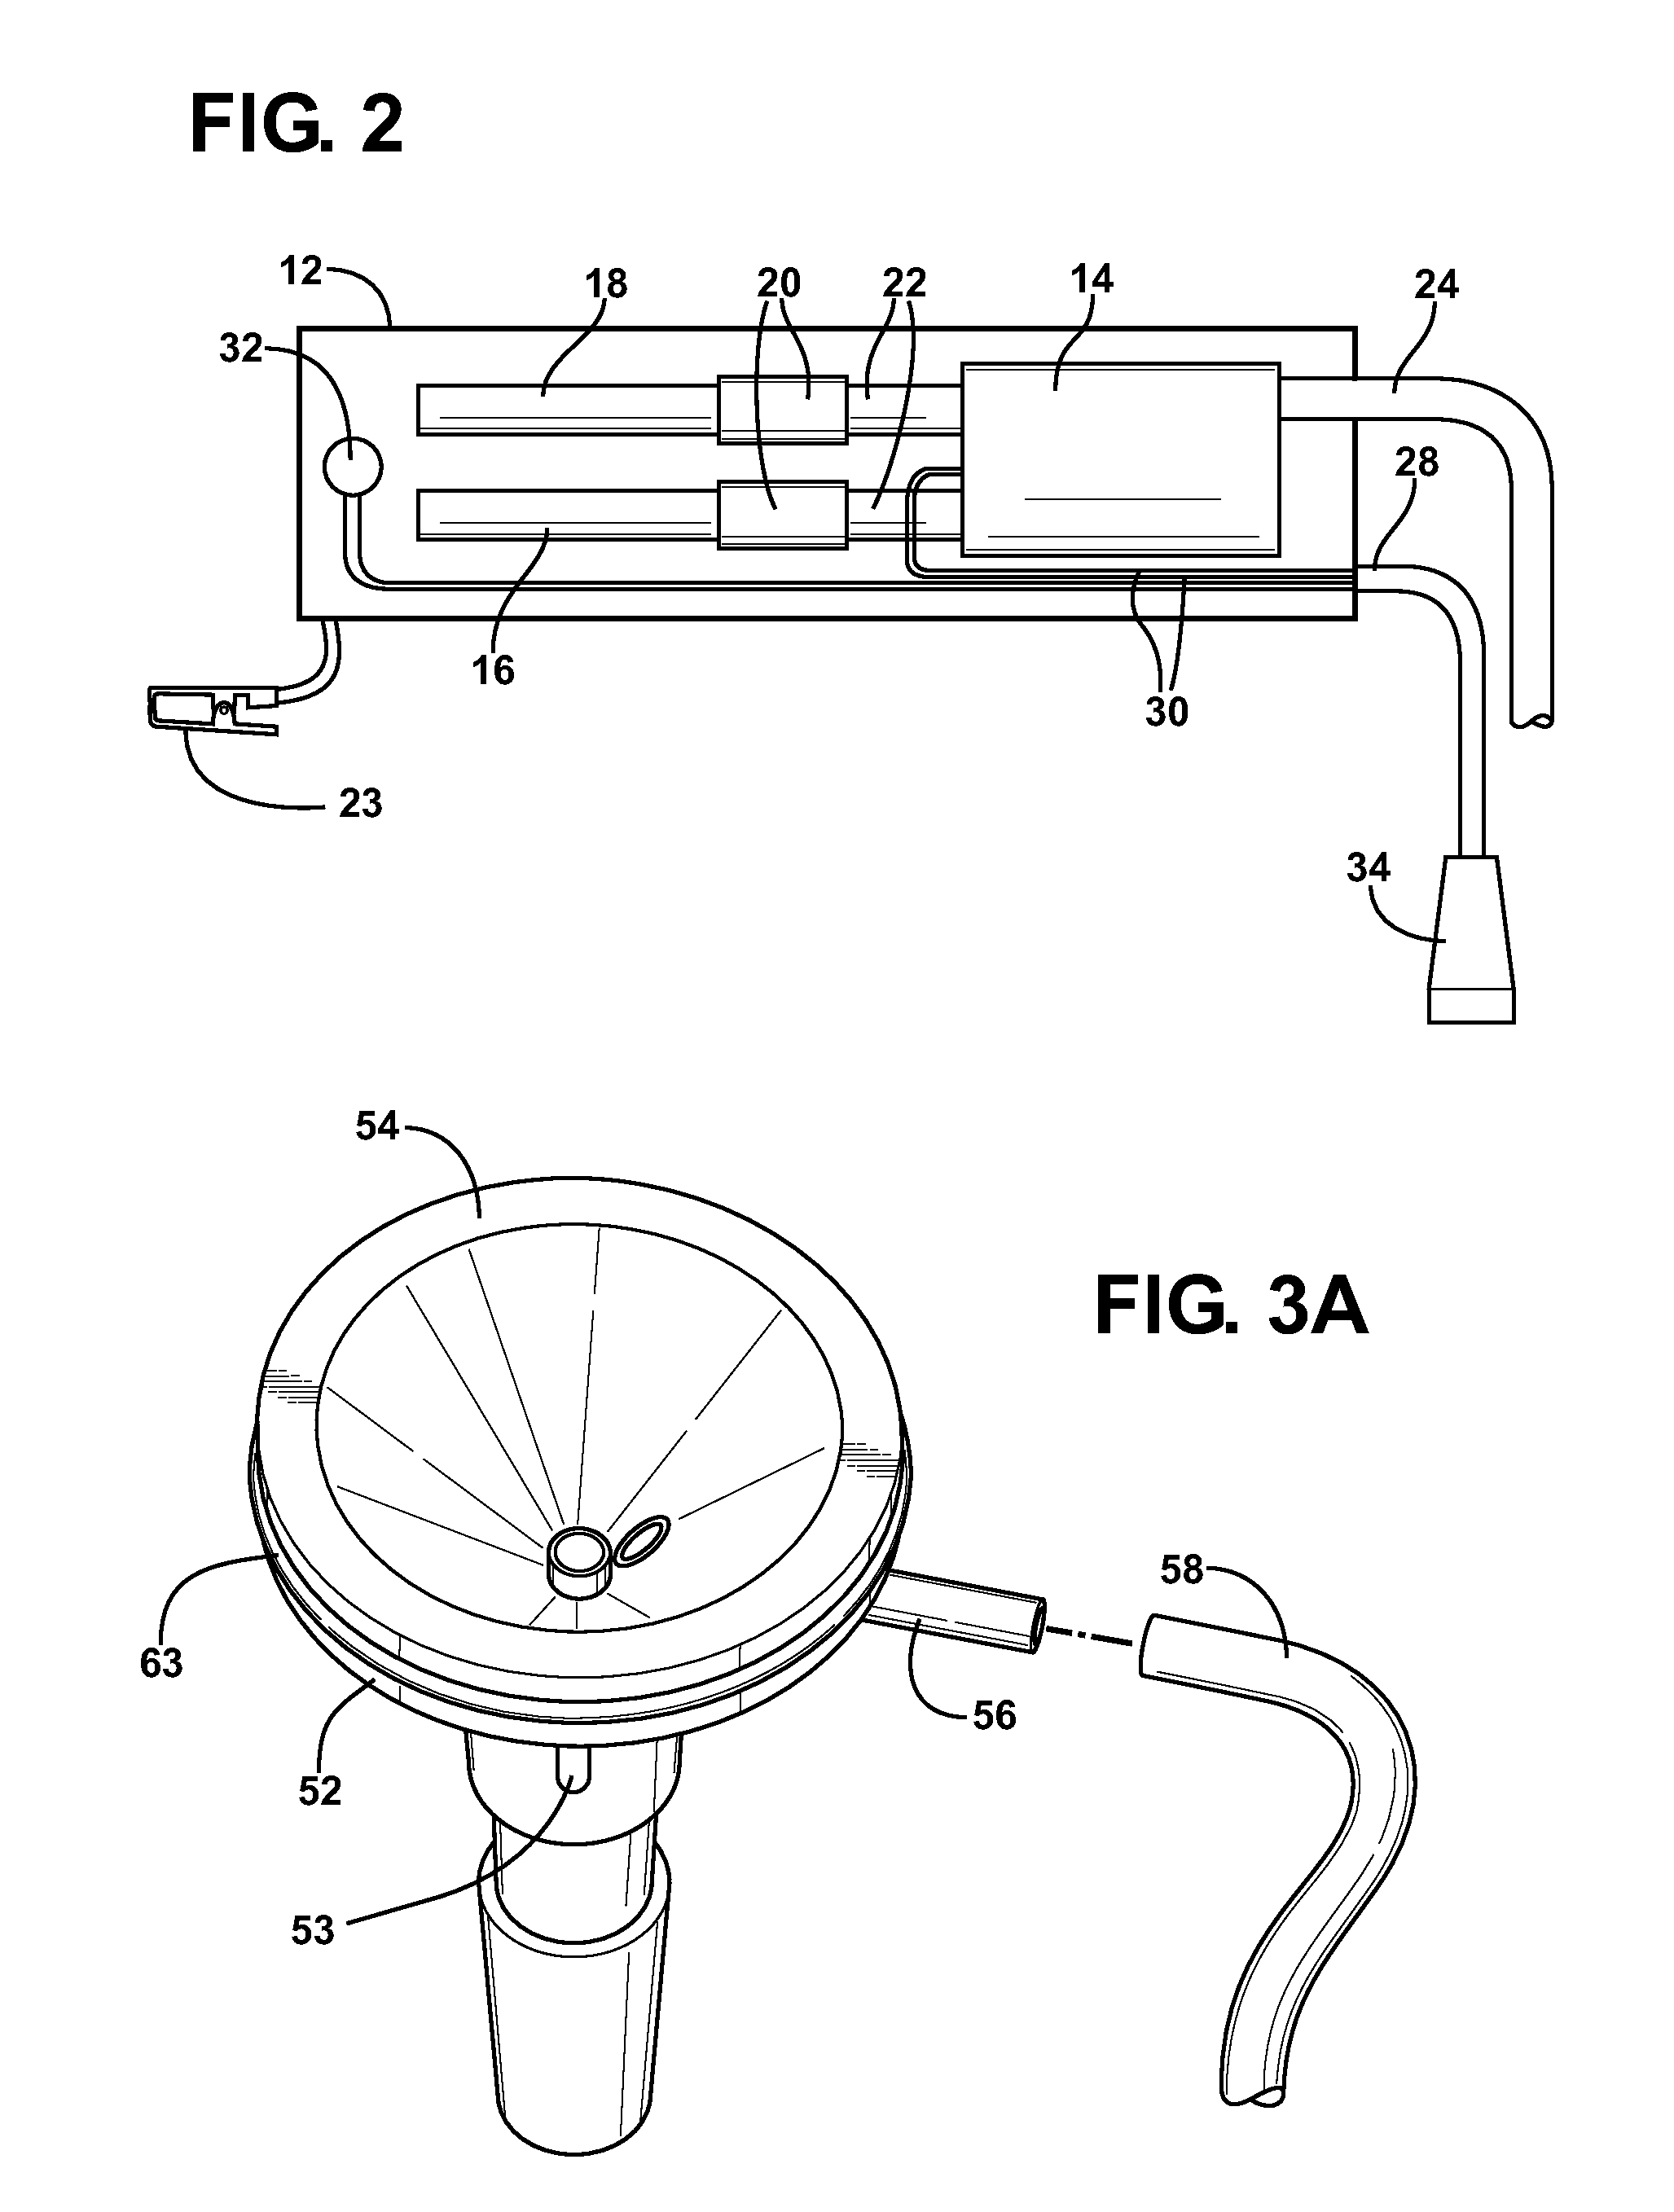 Universal physiologic sampling pump (PSP) capable of rapid response to breathing